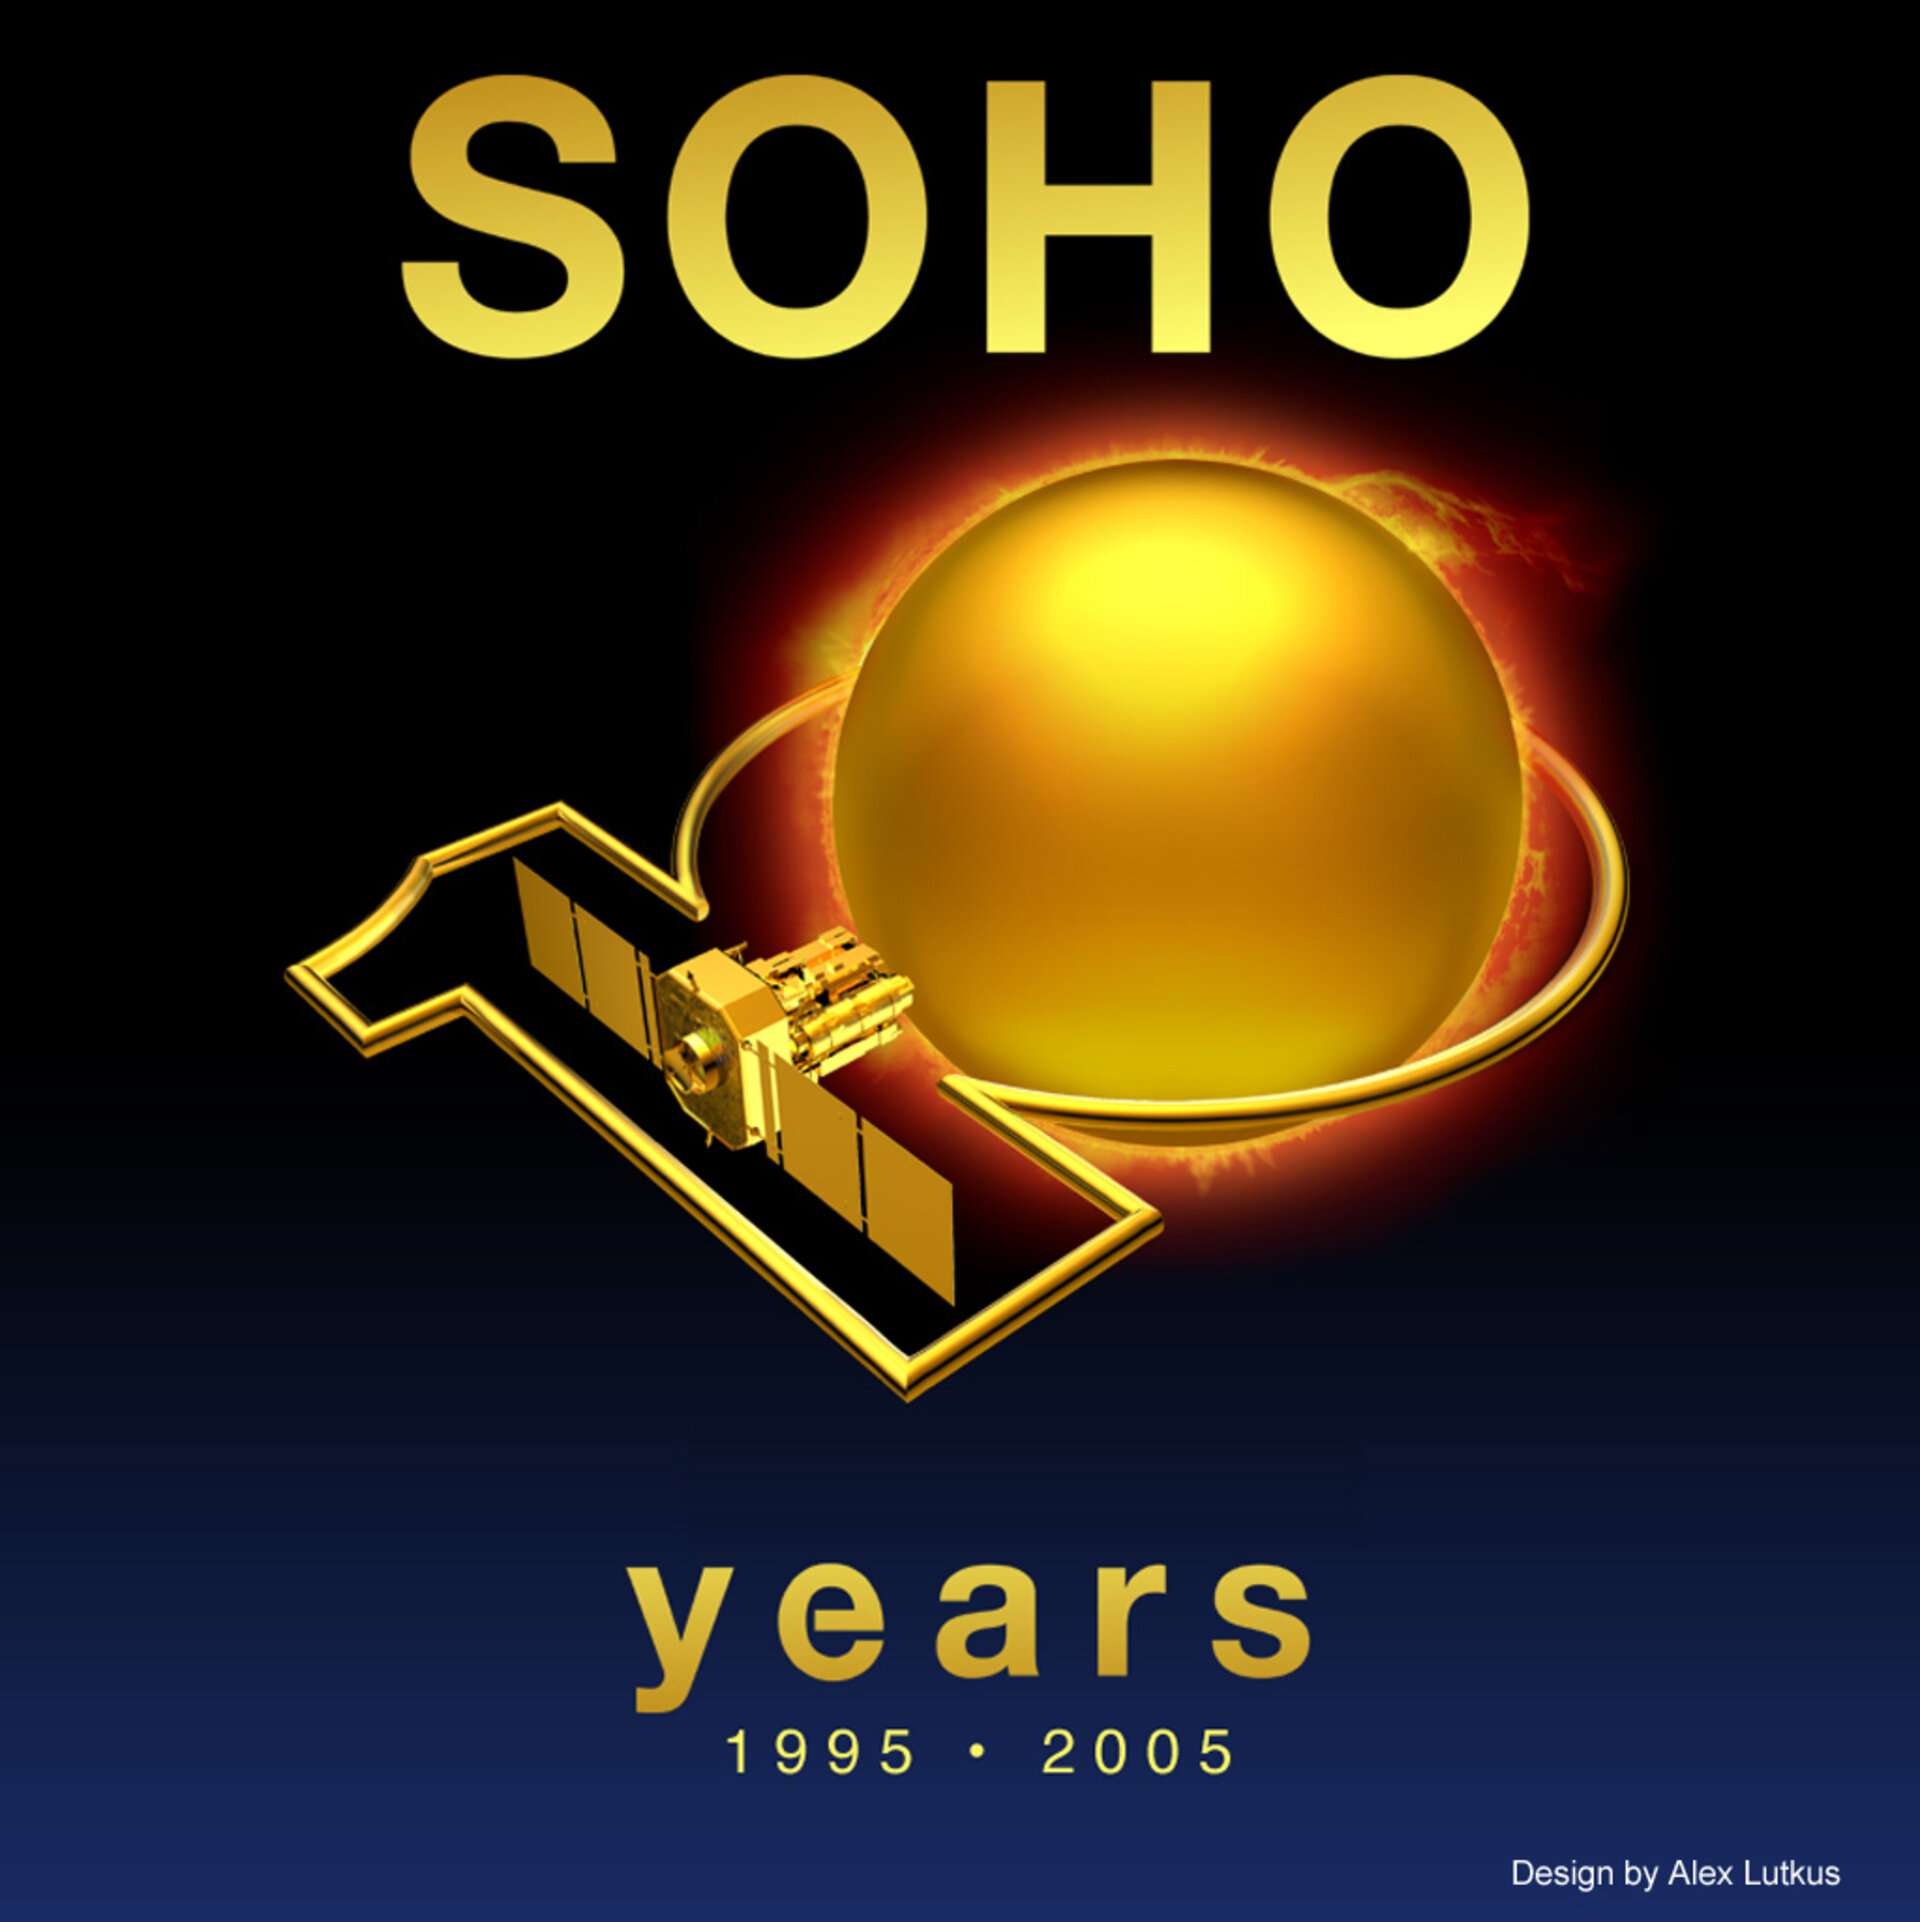 Logo for the tenth anniversary of SOHO’s launch